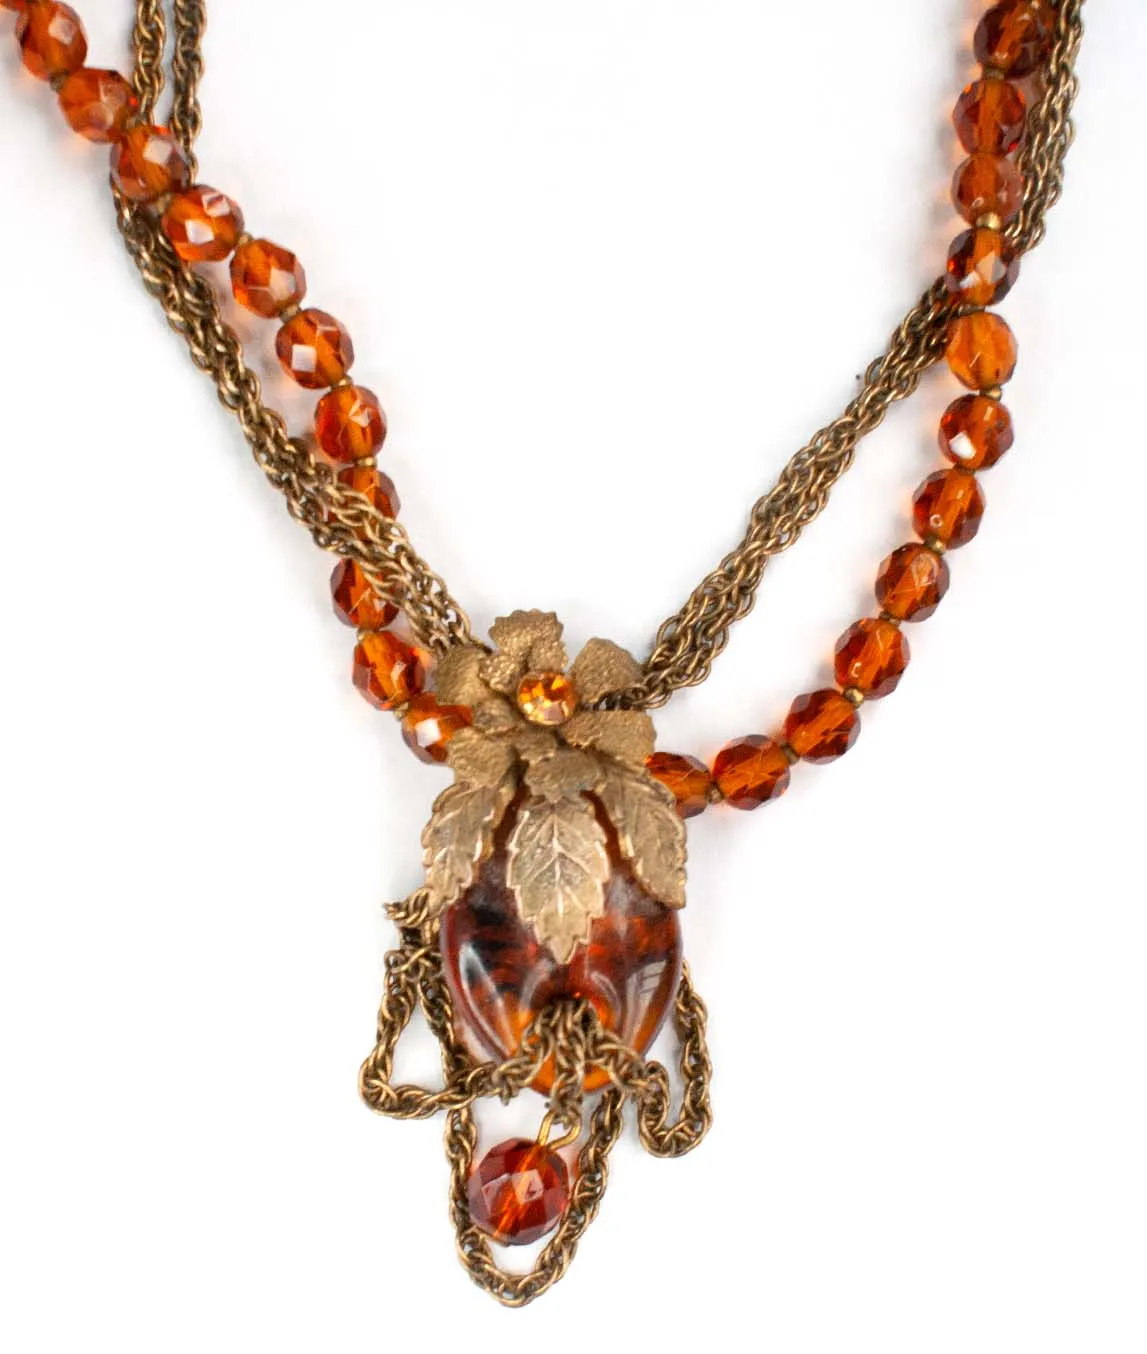 Miriam Haskell pineapple pendant necklace with bronze beads and chains